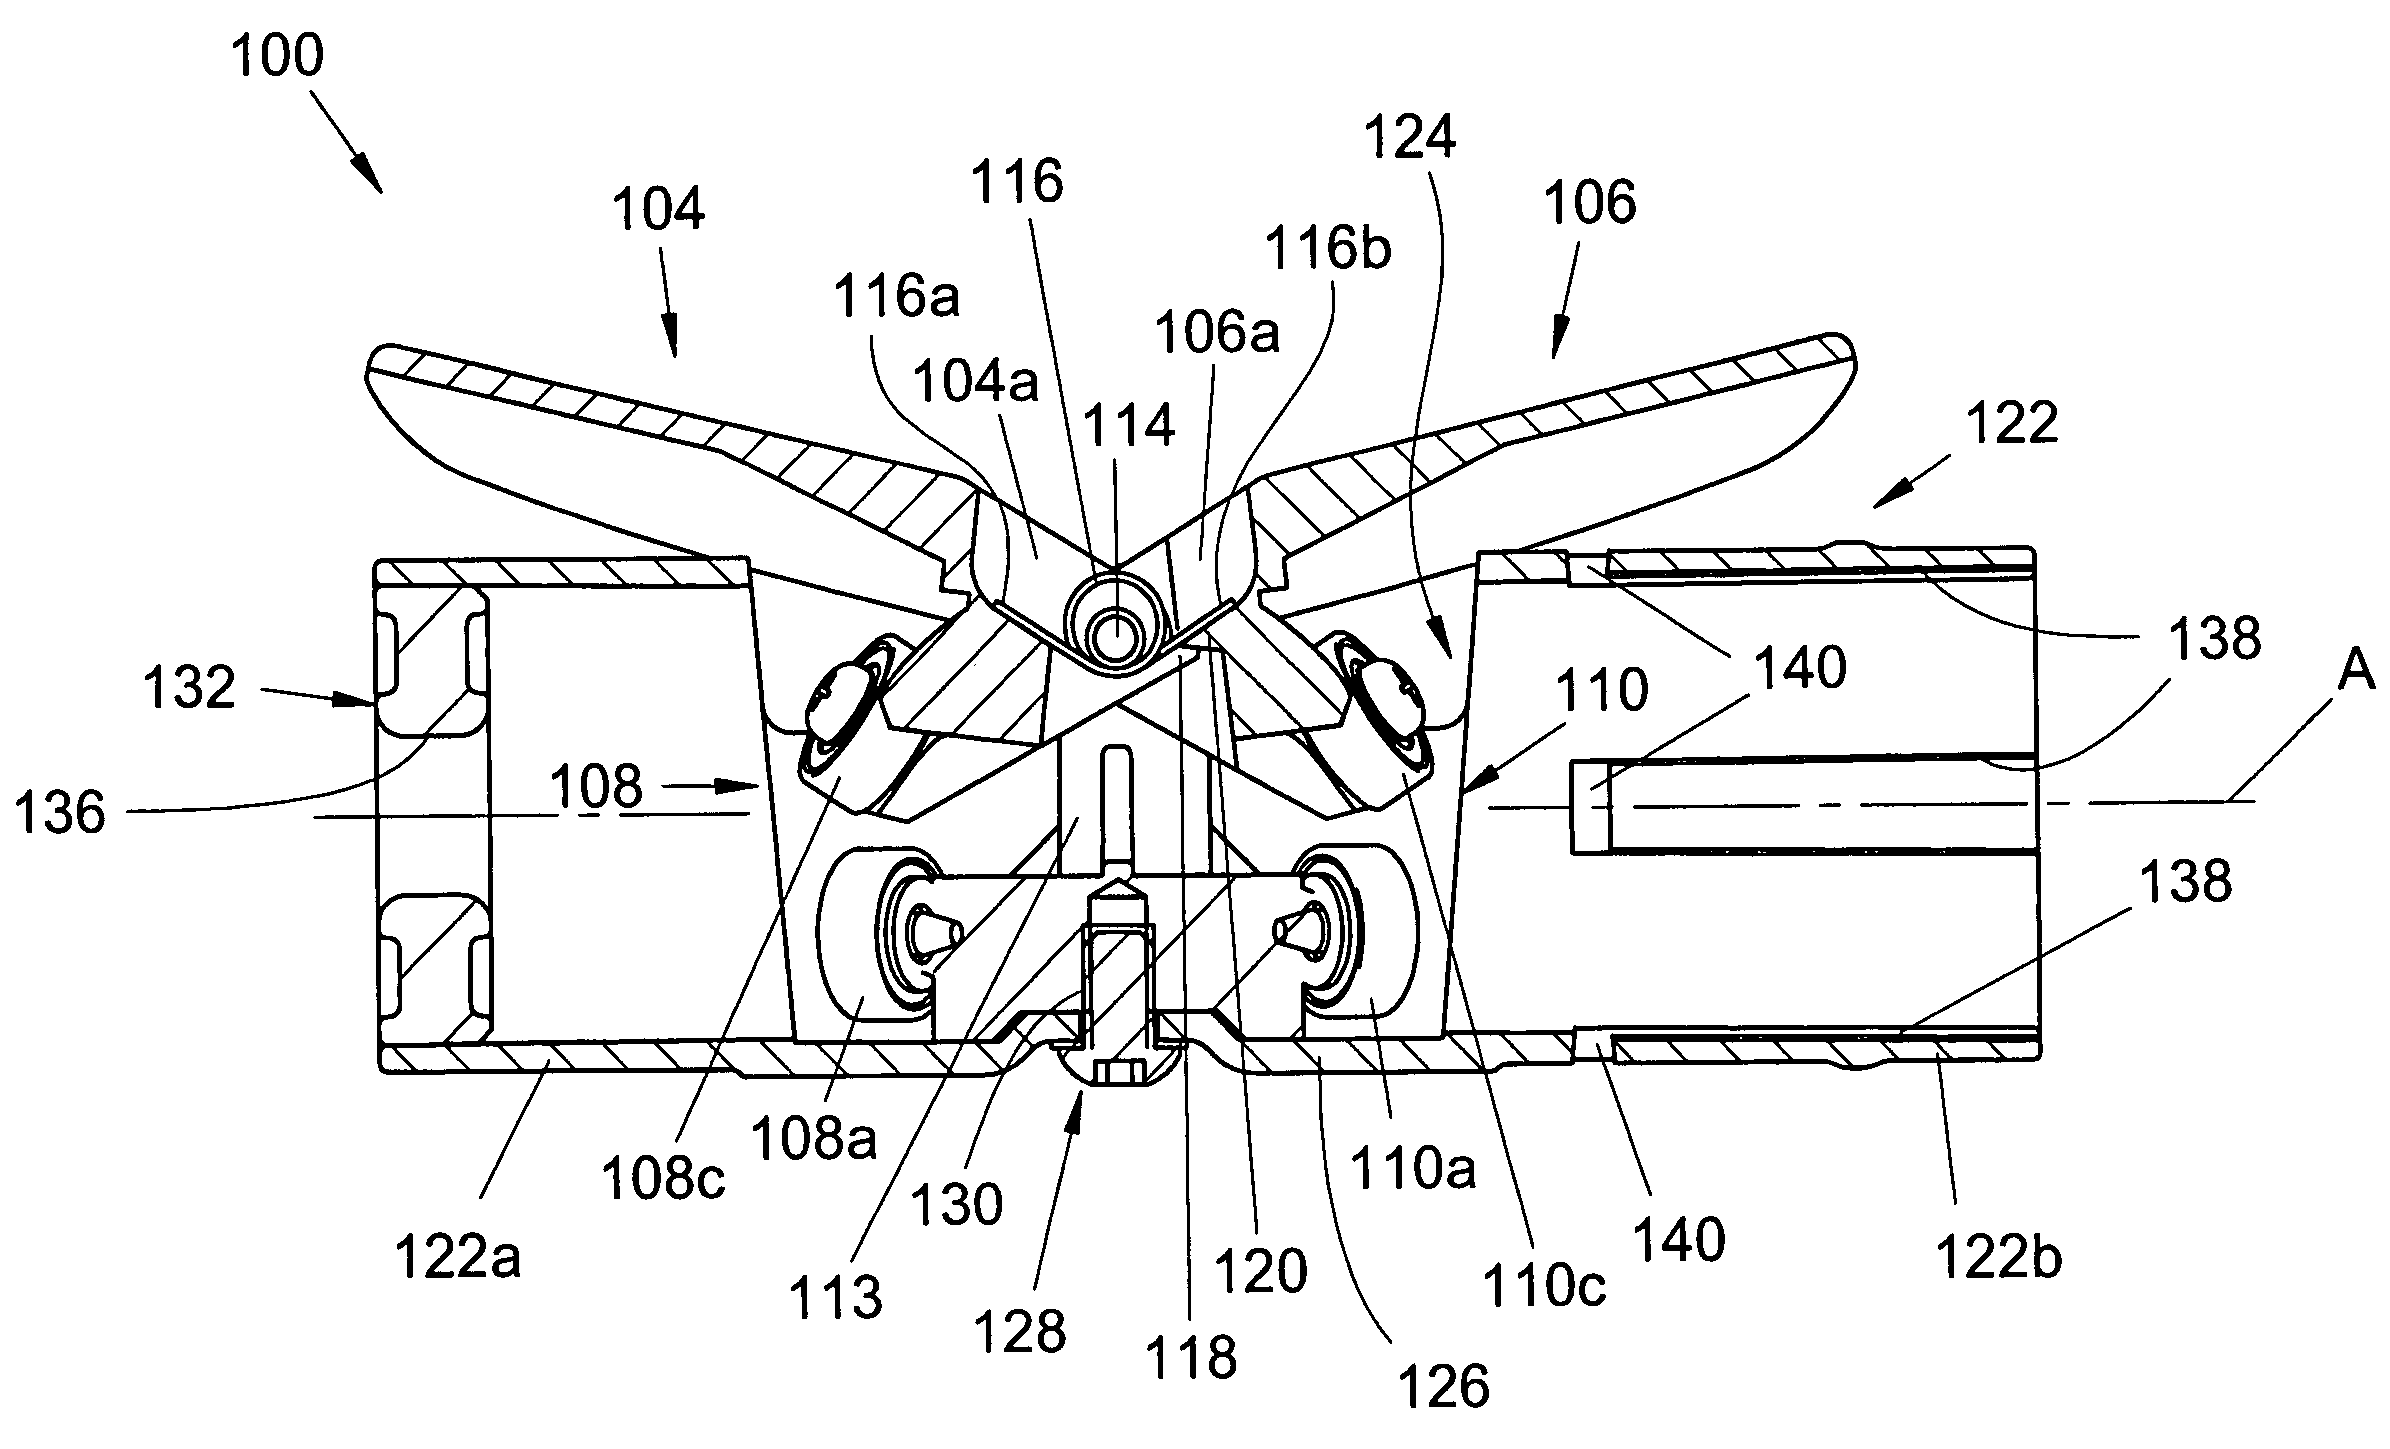 Feed control device for plumbing tools